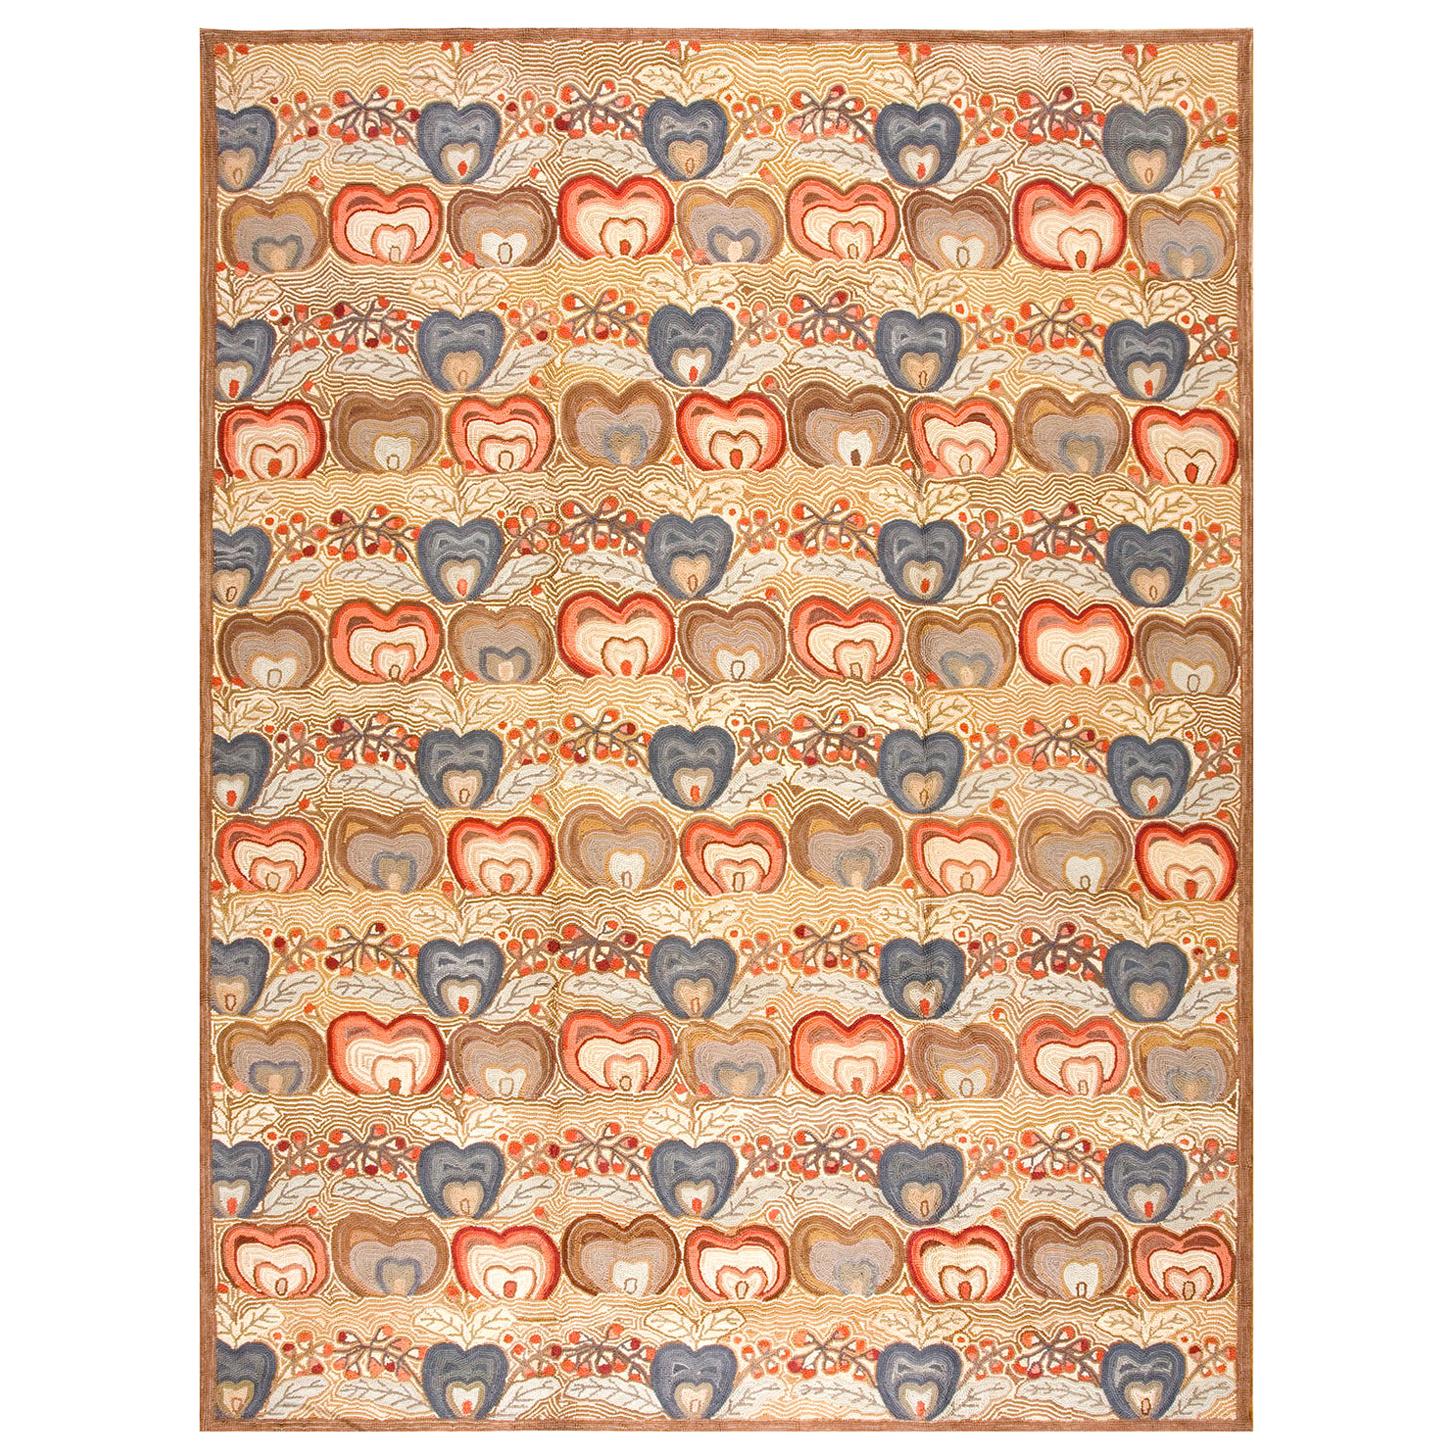 Contemporary American Hooked Rug (10' x 14' - 305x427 ) For Sale